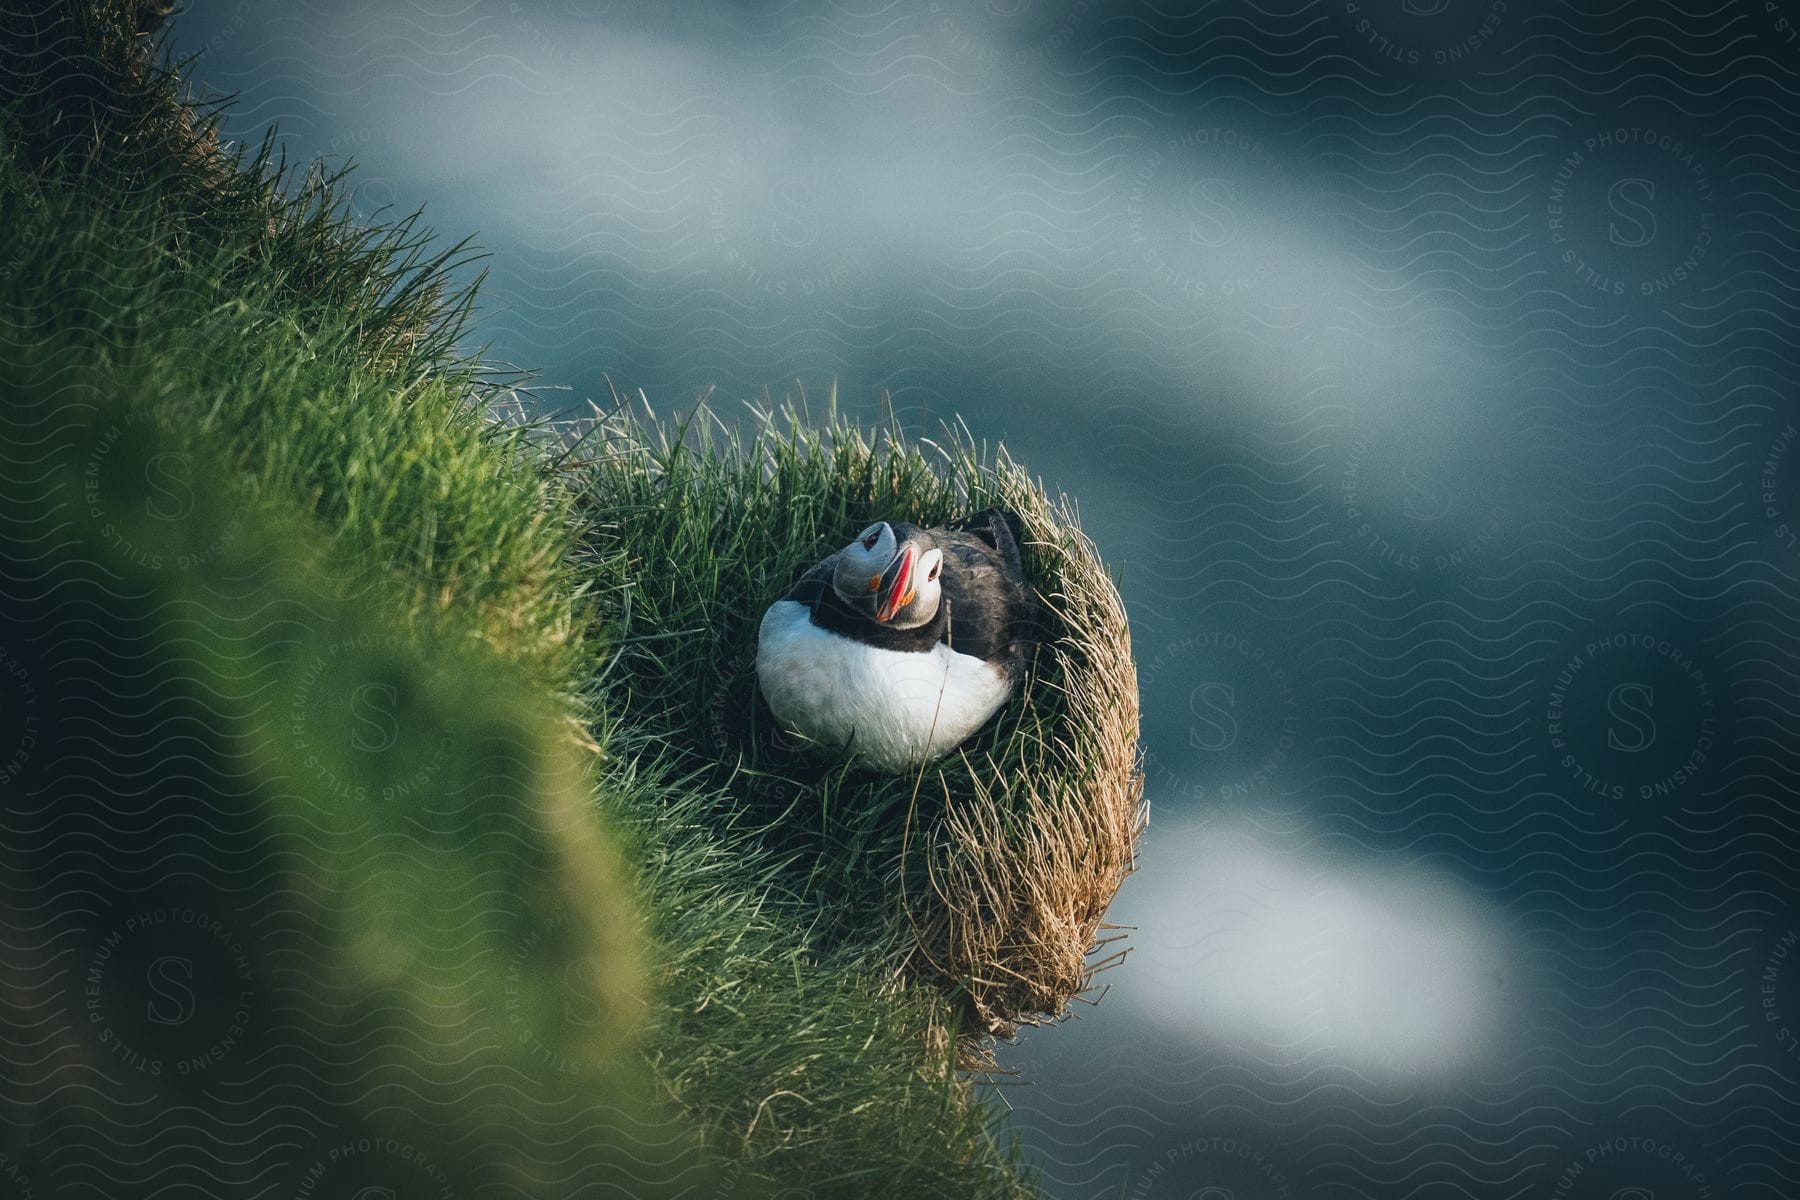 An atlantic puffin perched on a tree branch